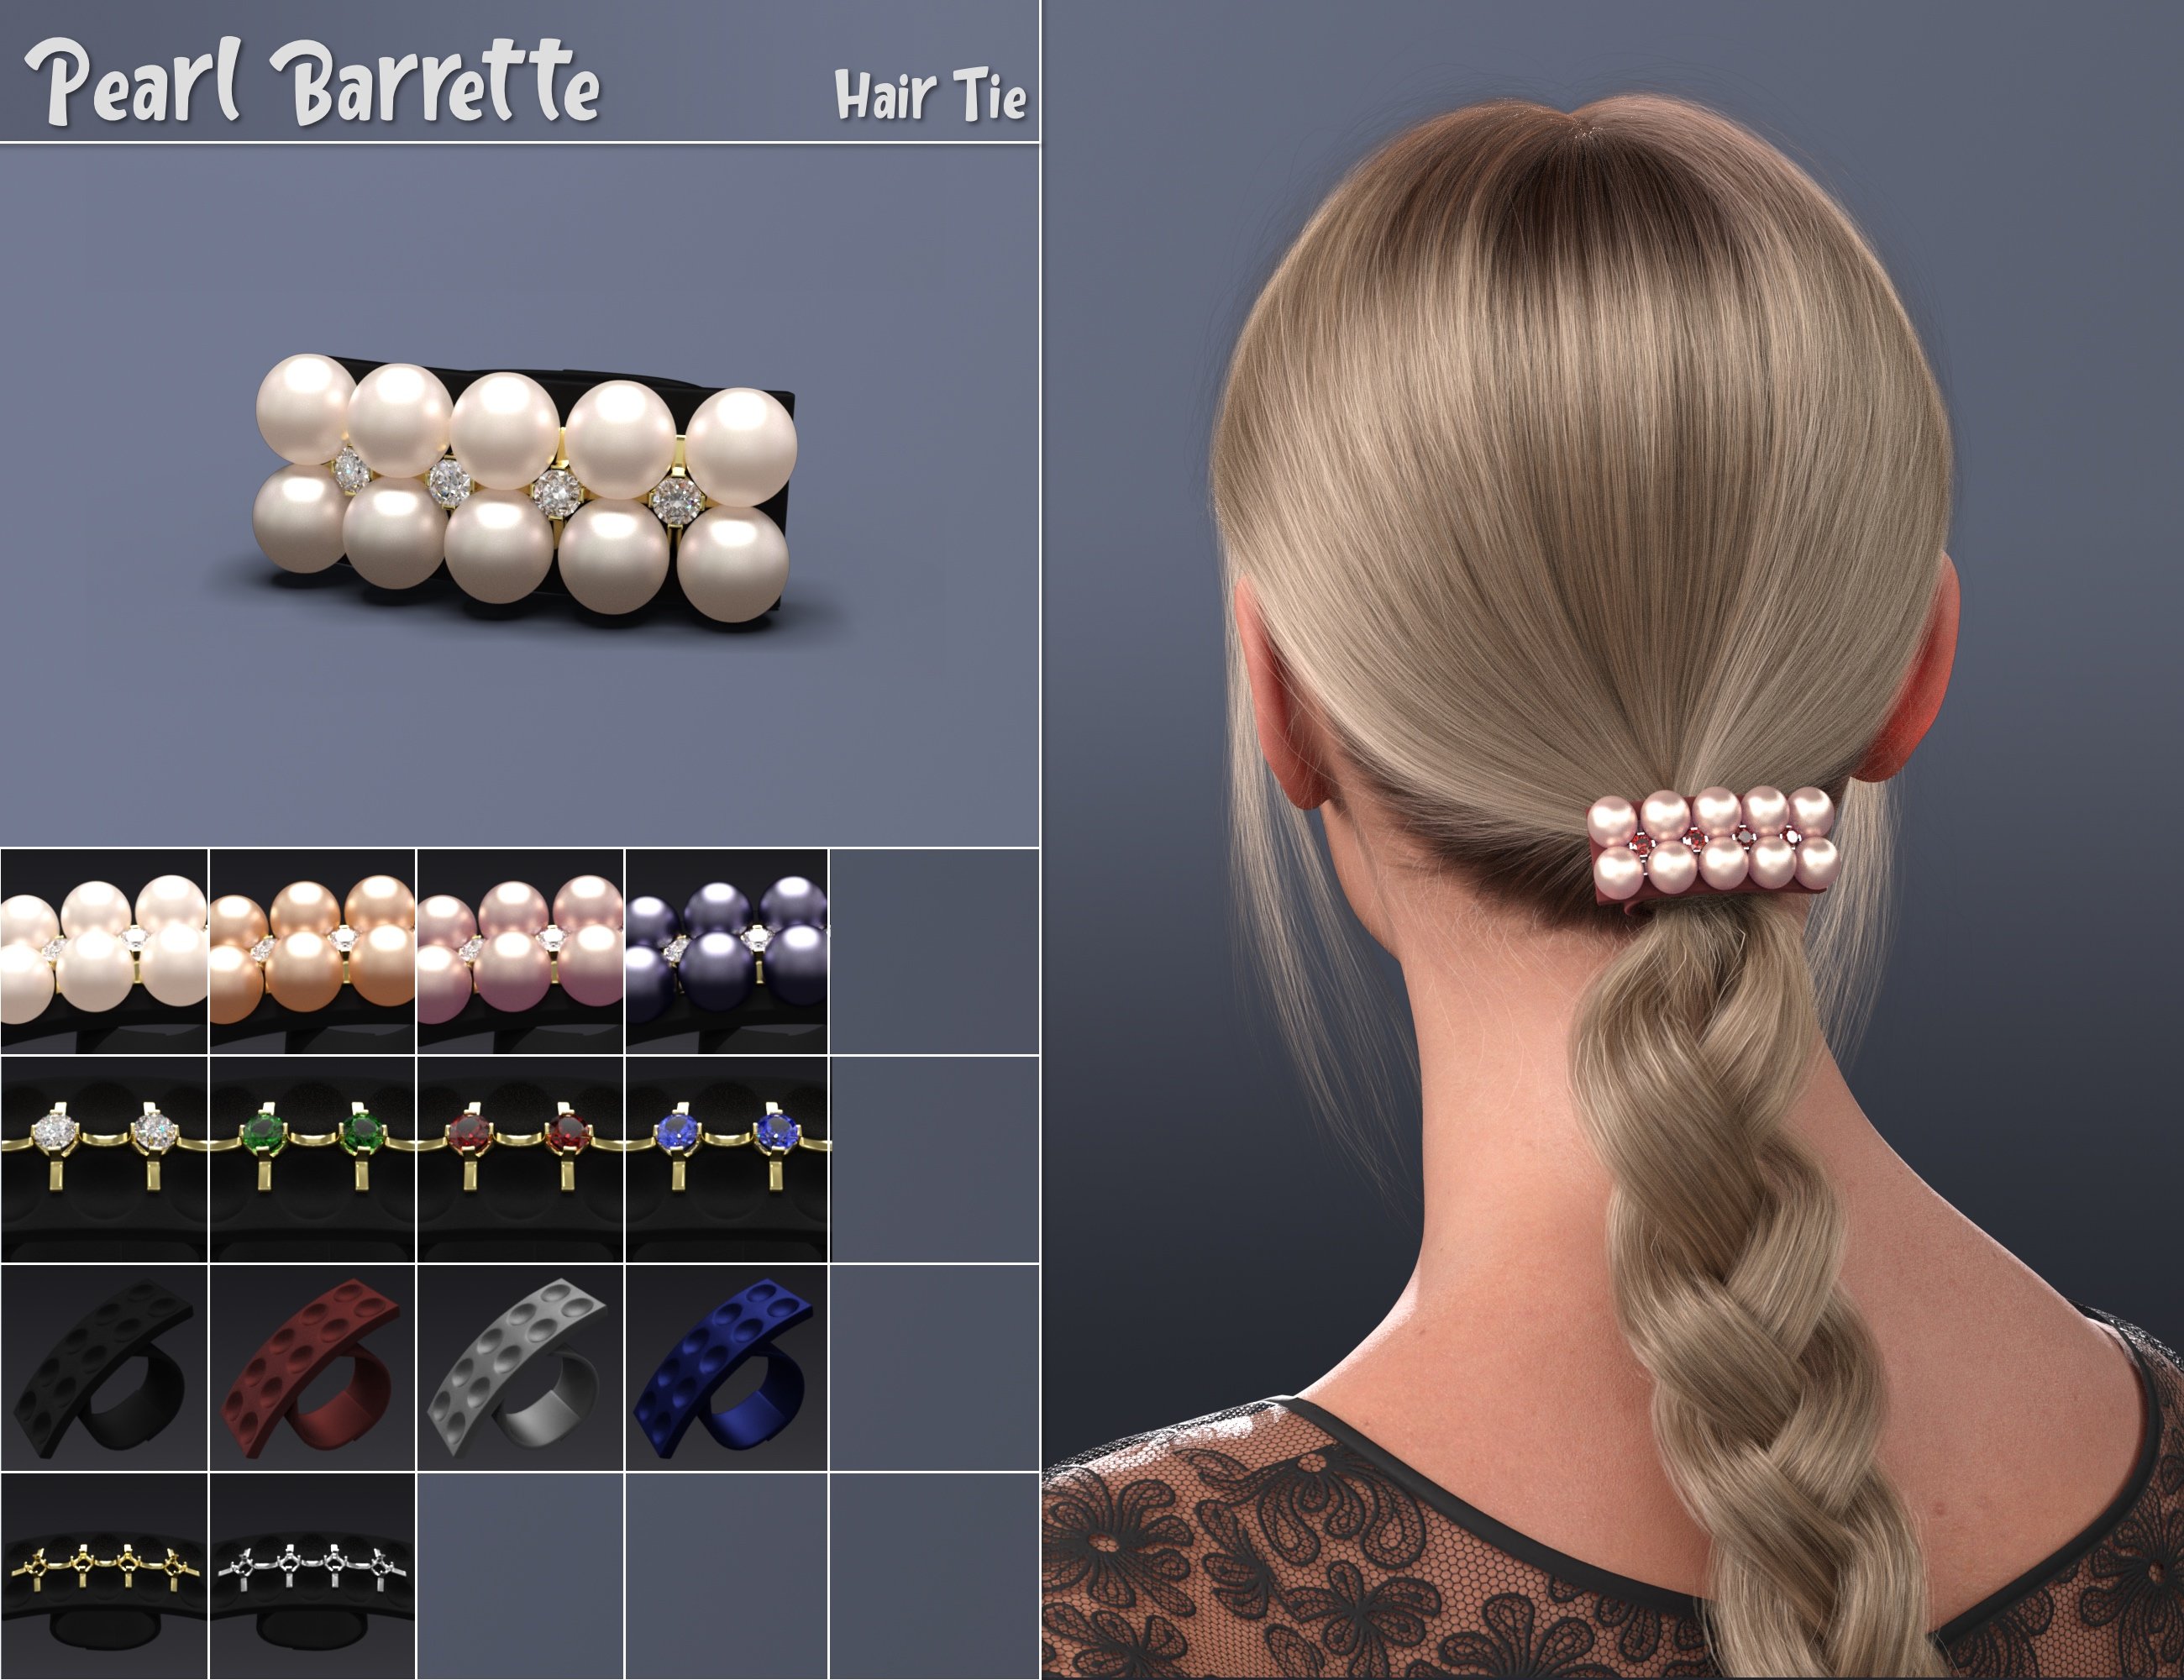 NG 3-in-1 Low Ponytail Hair Accessories - Set 2 by: NewGuy, 3D Models by Daz 3D